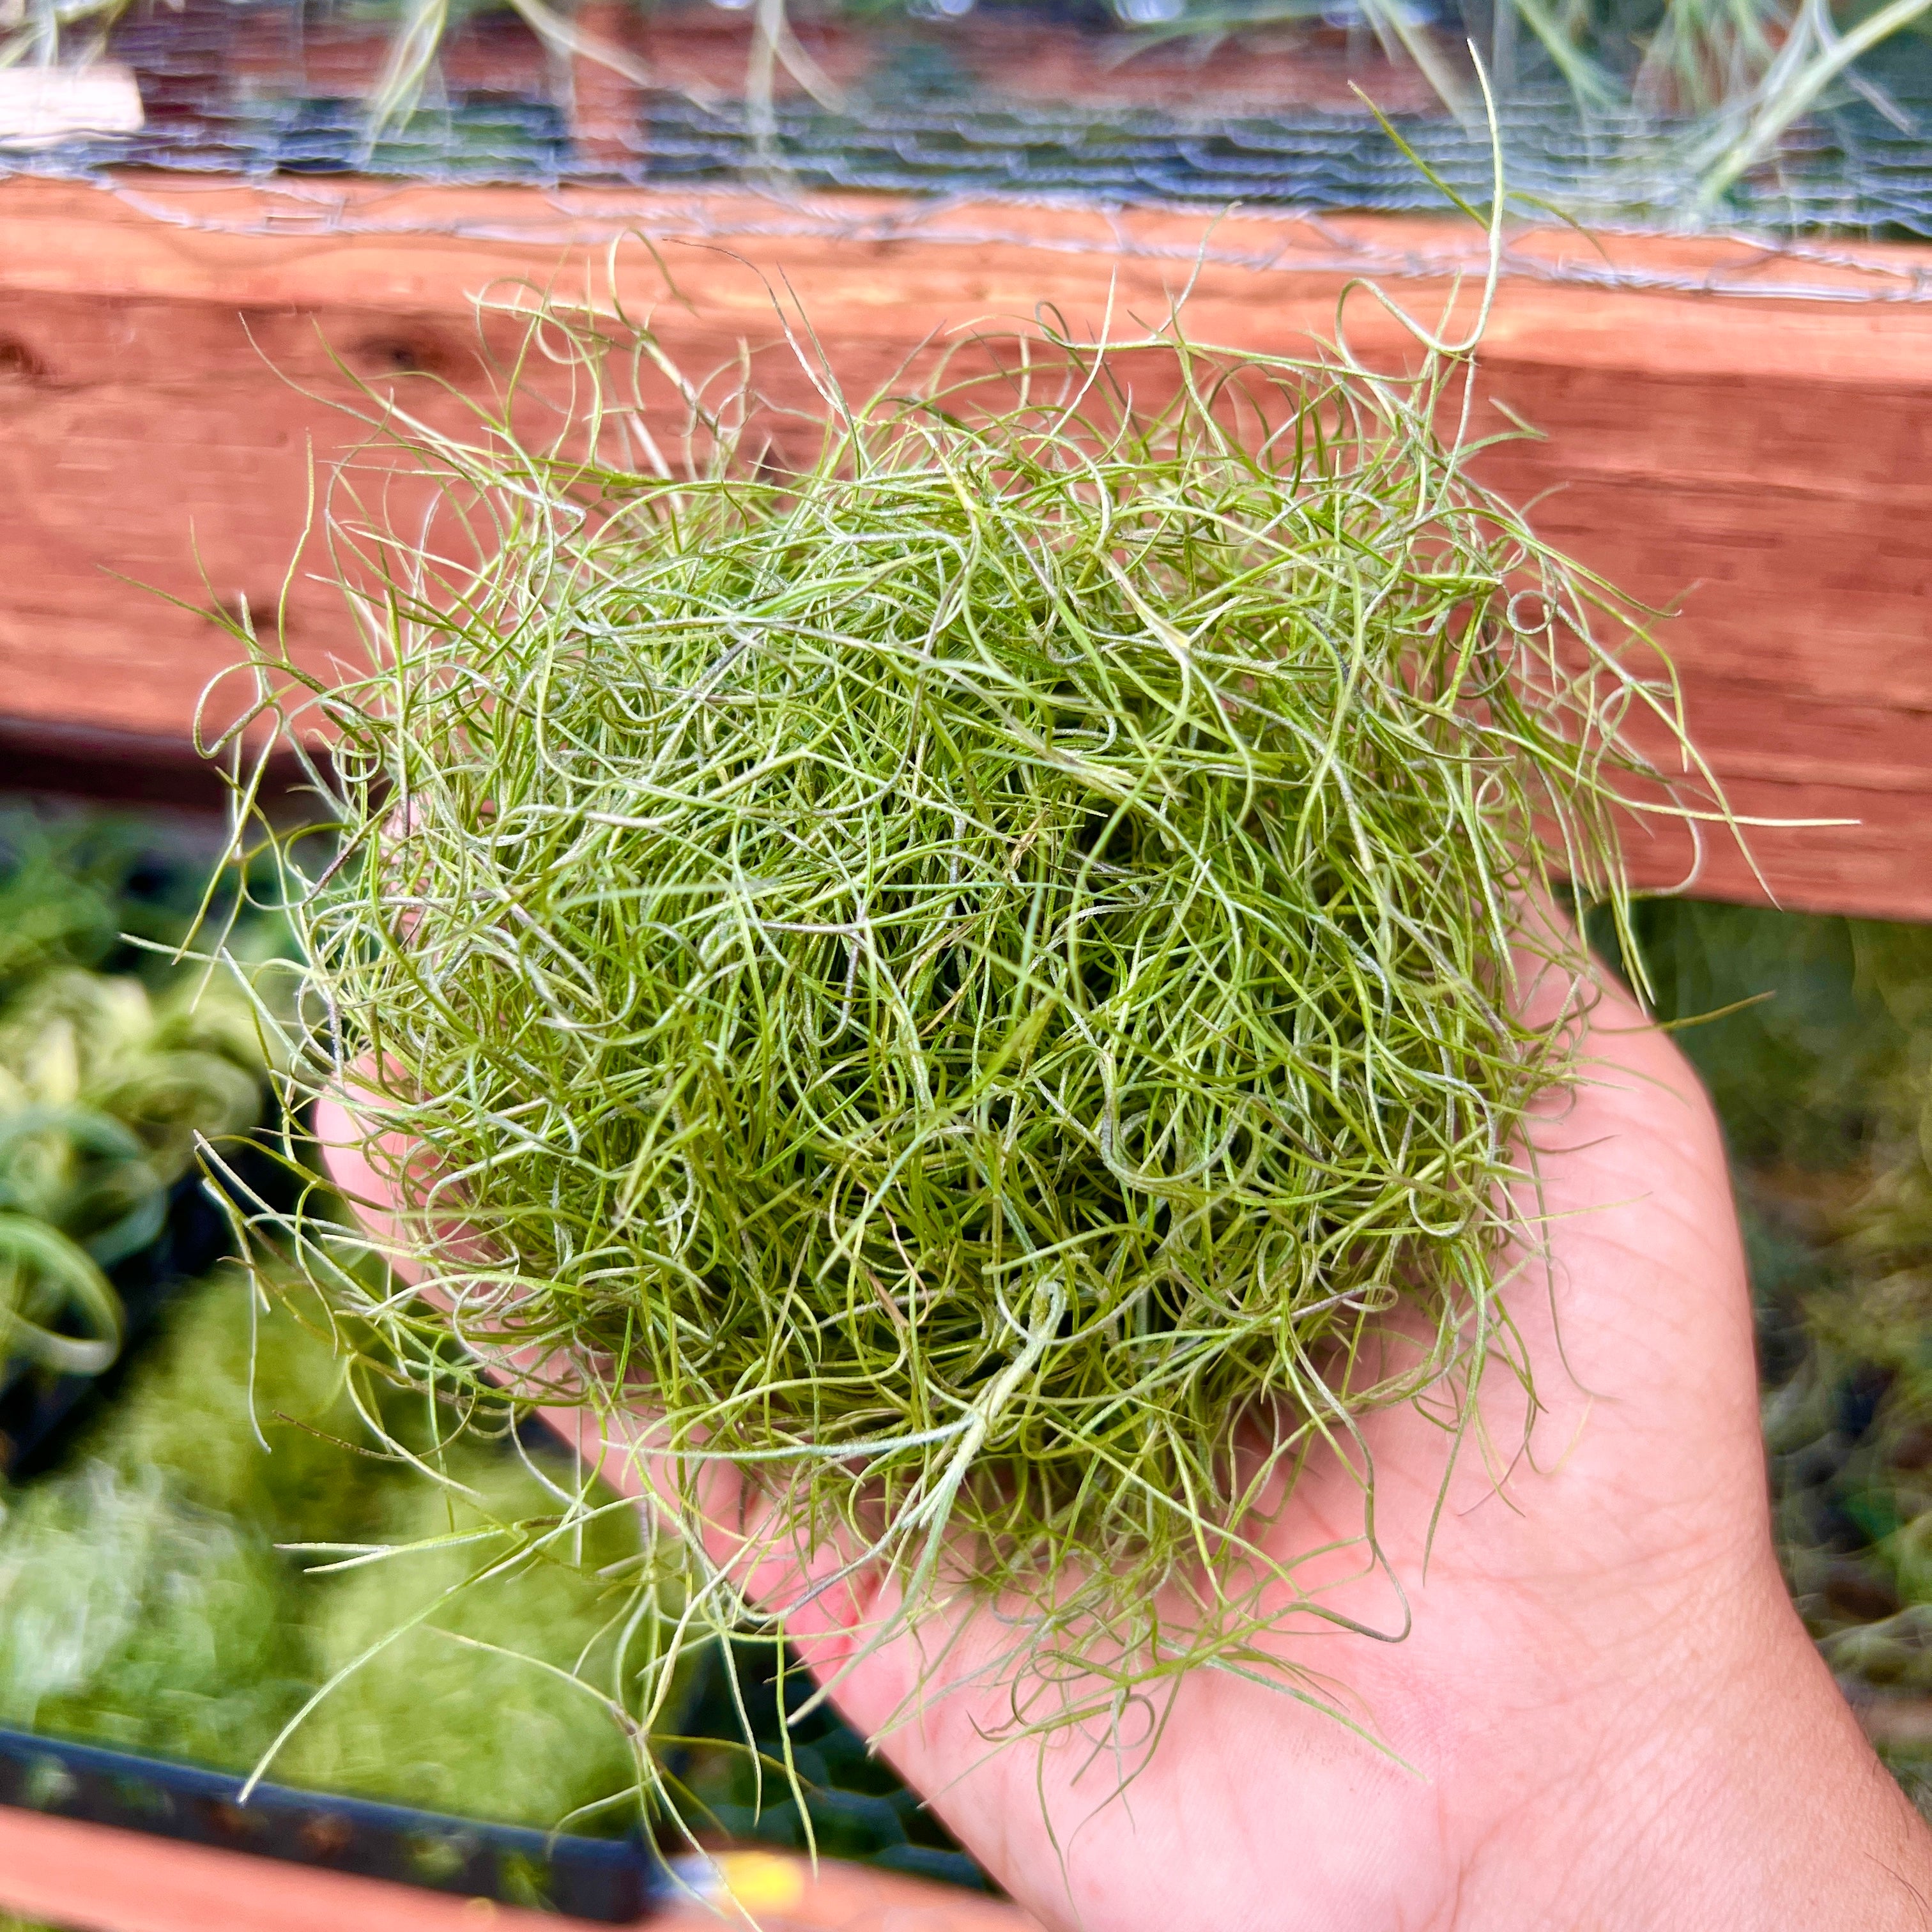 Common misconceptions about Spanish moss